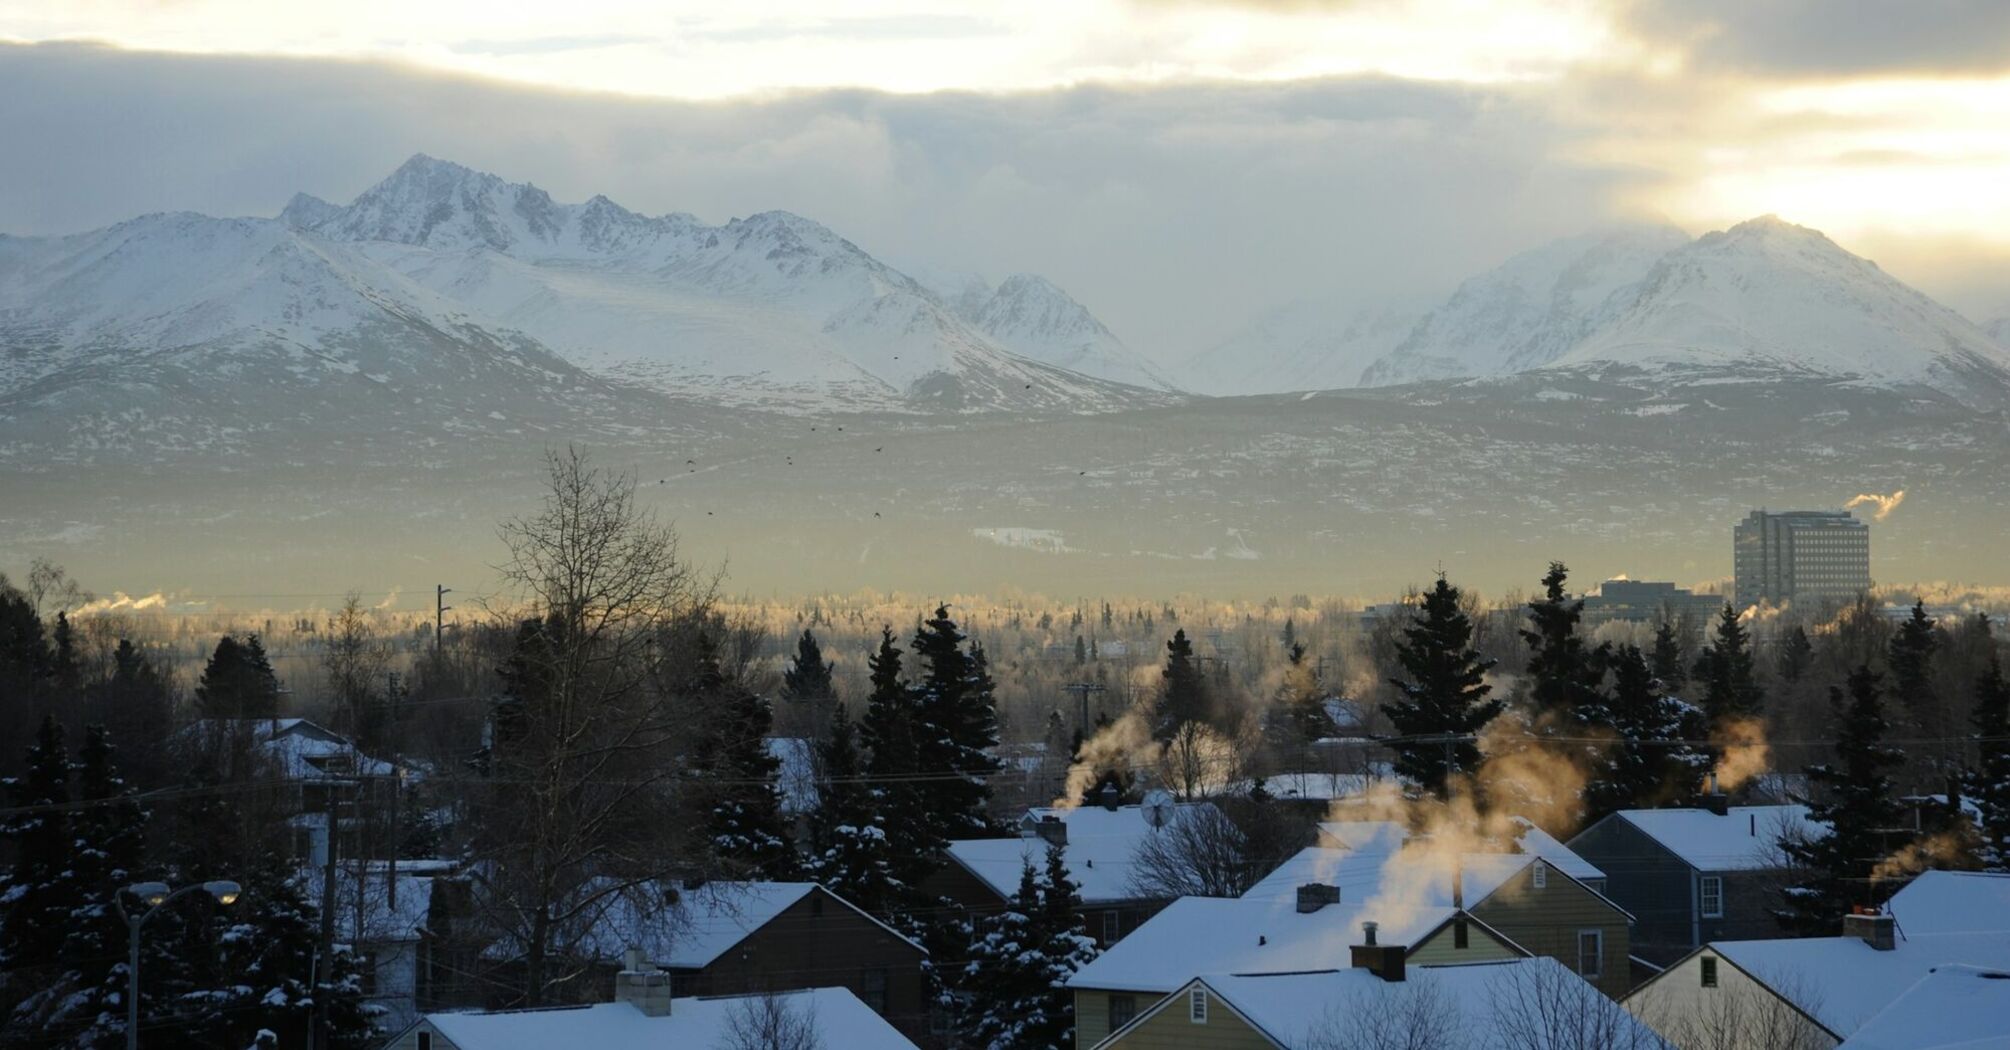 Anchorage with snowy mountains in the background